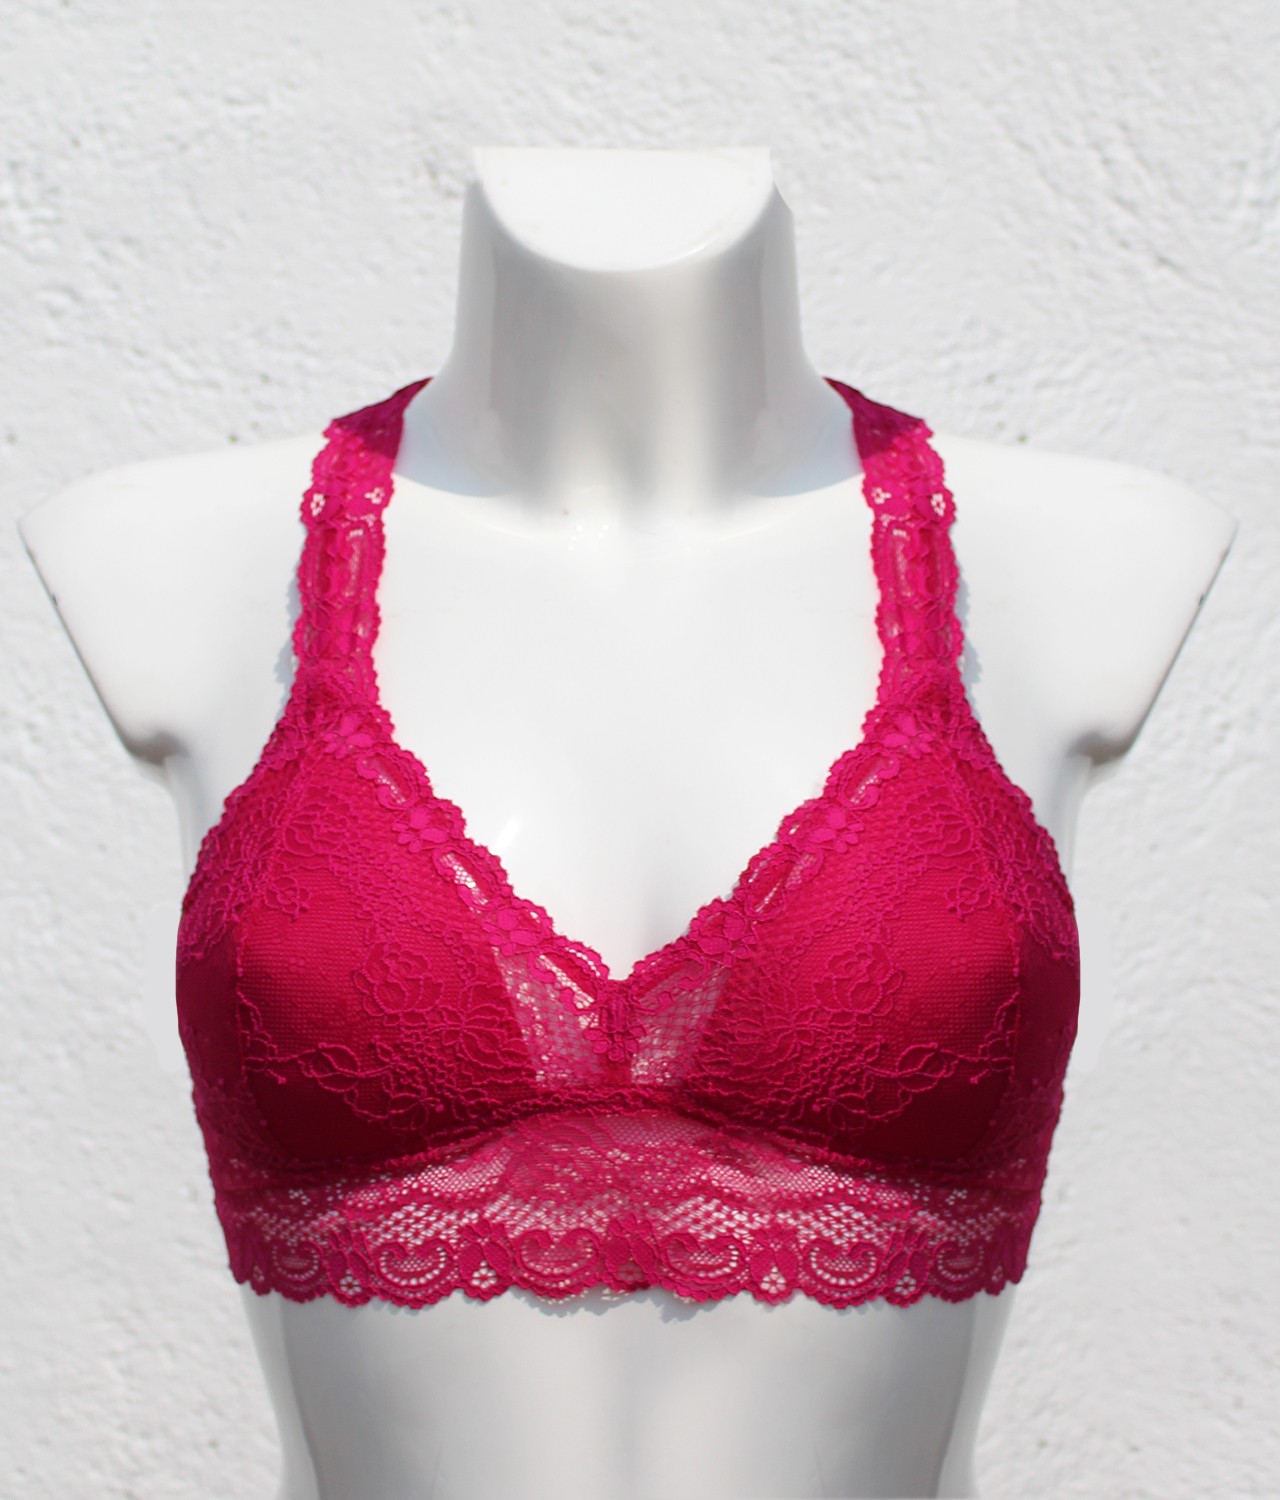 TOFO Women's Hot Pink Lace Bralette